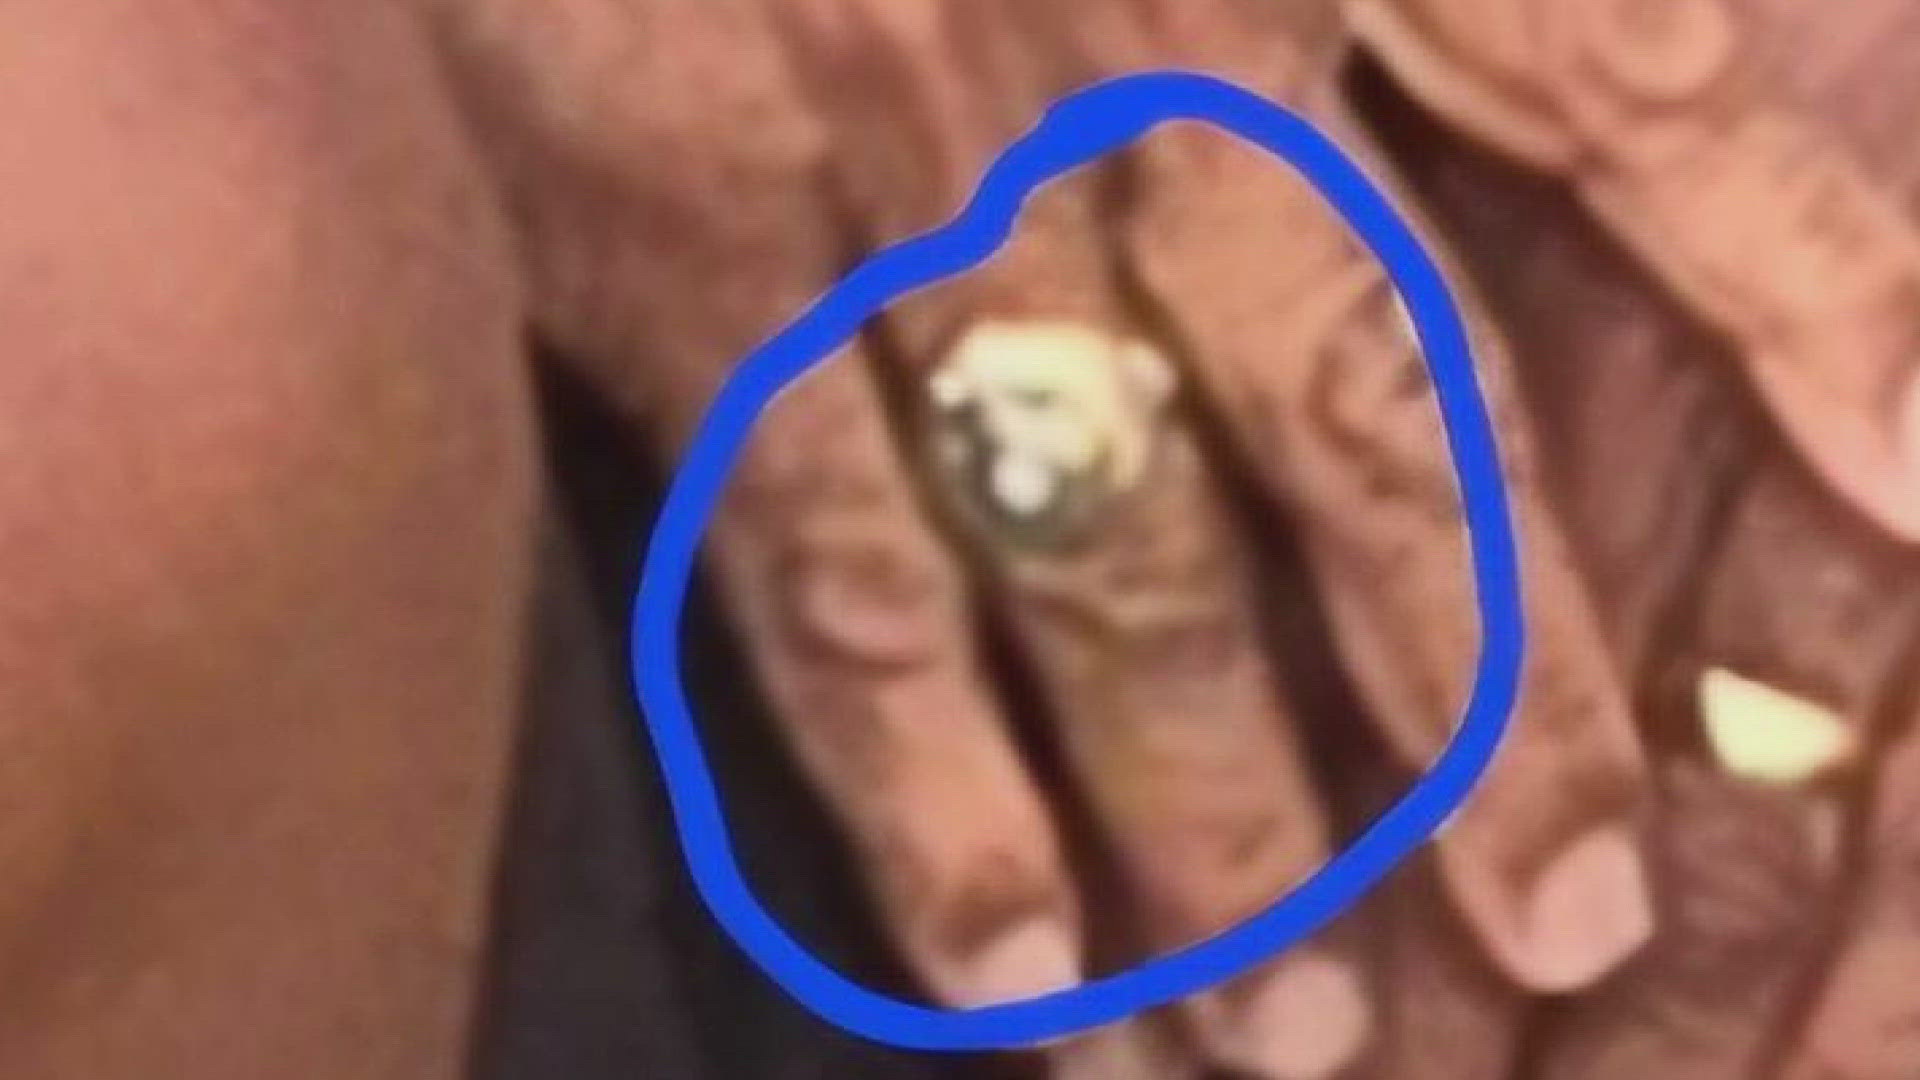 A former New York firefighter flew to New Orleans for Jazz Fest and while enjoying his time here with his wife, a very special ring slipped off his finger.